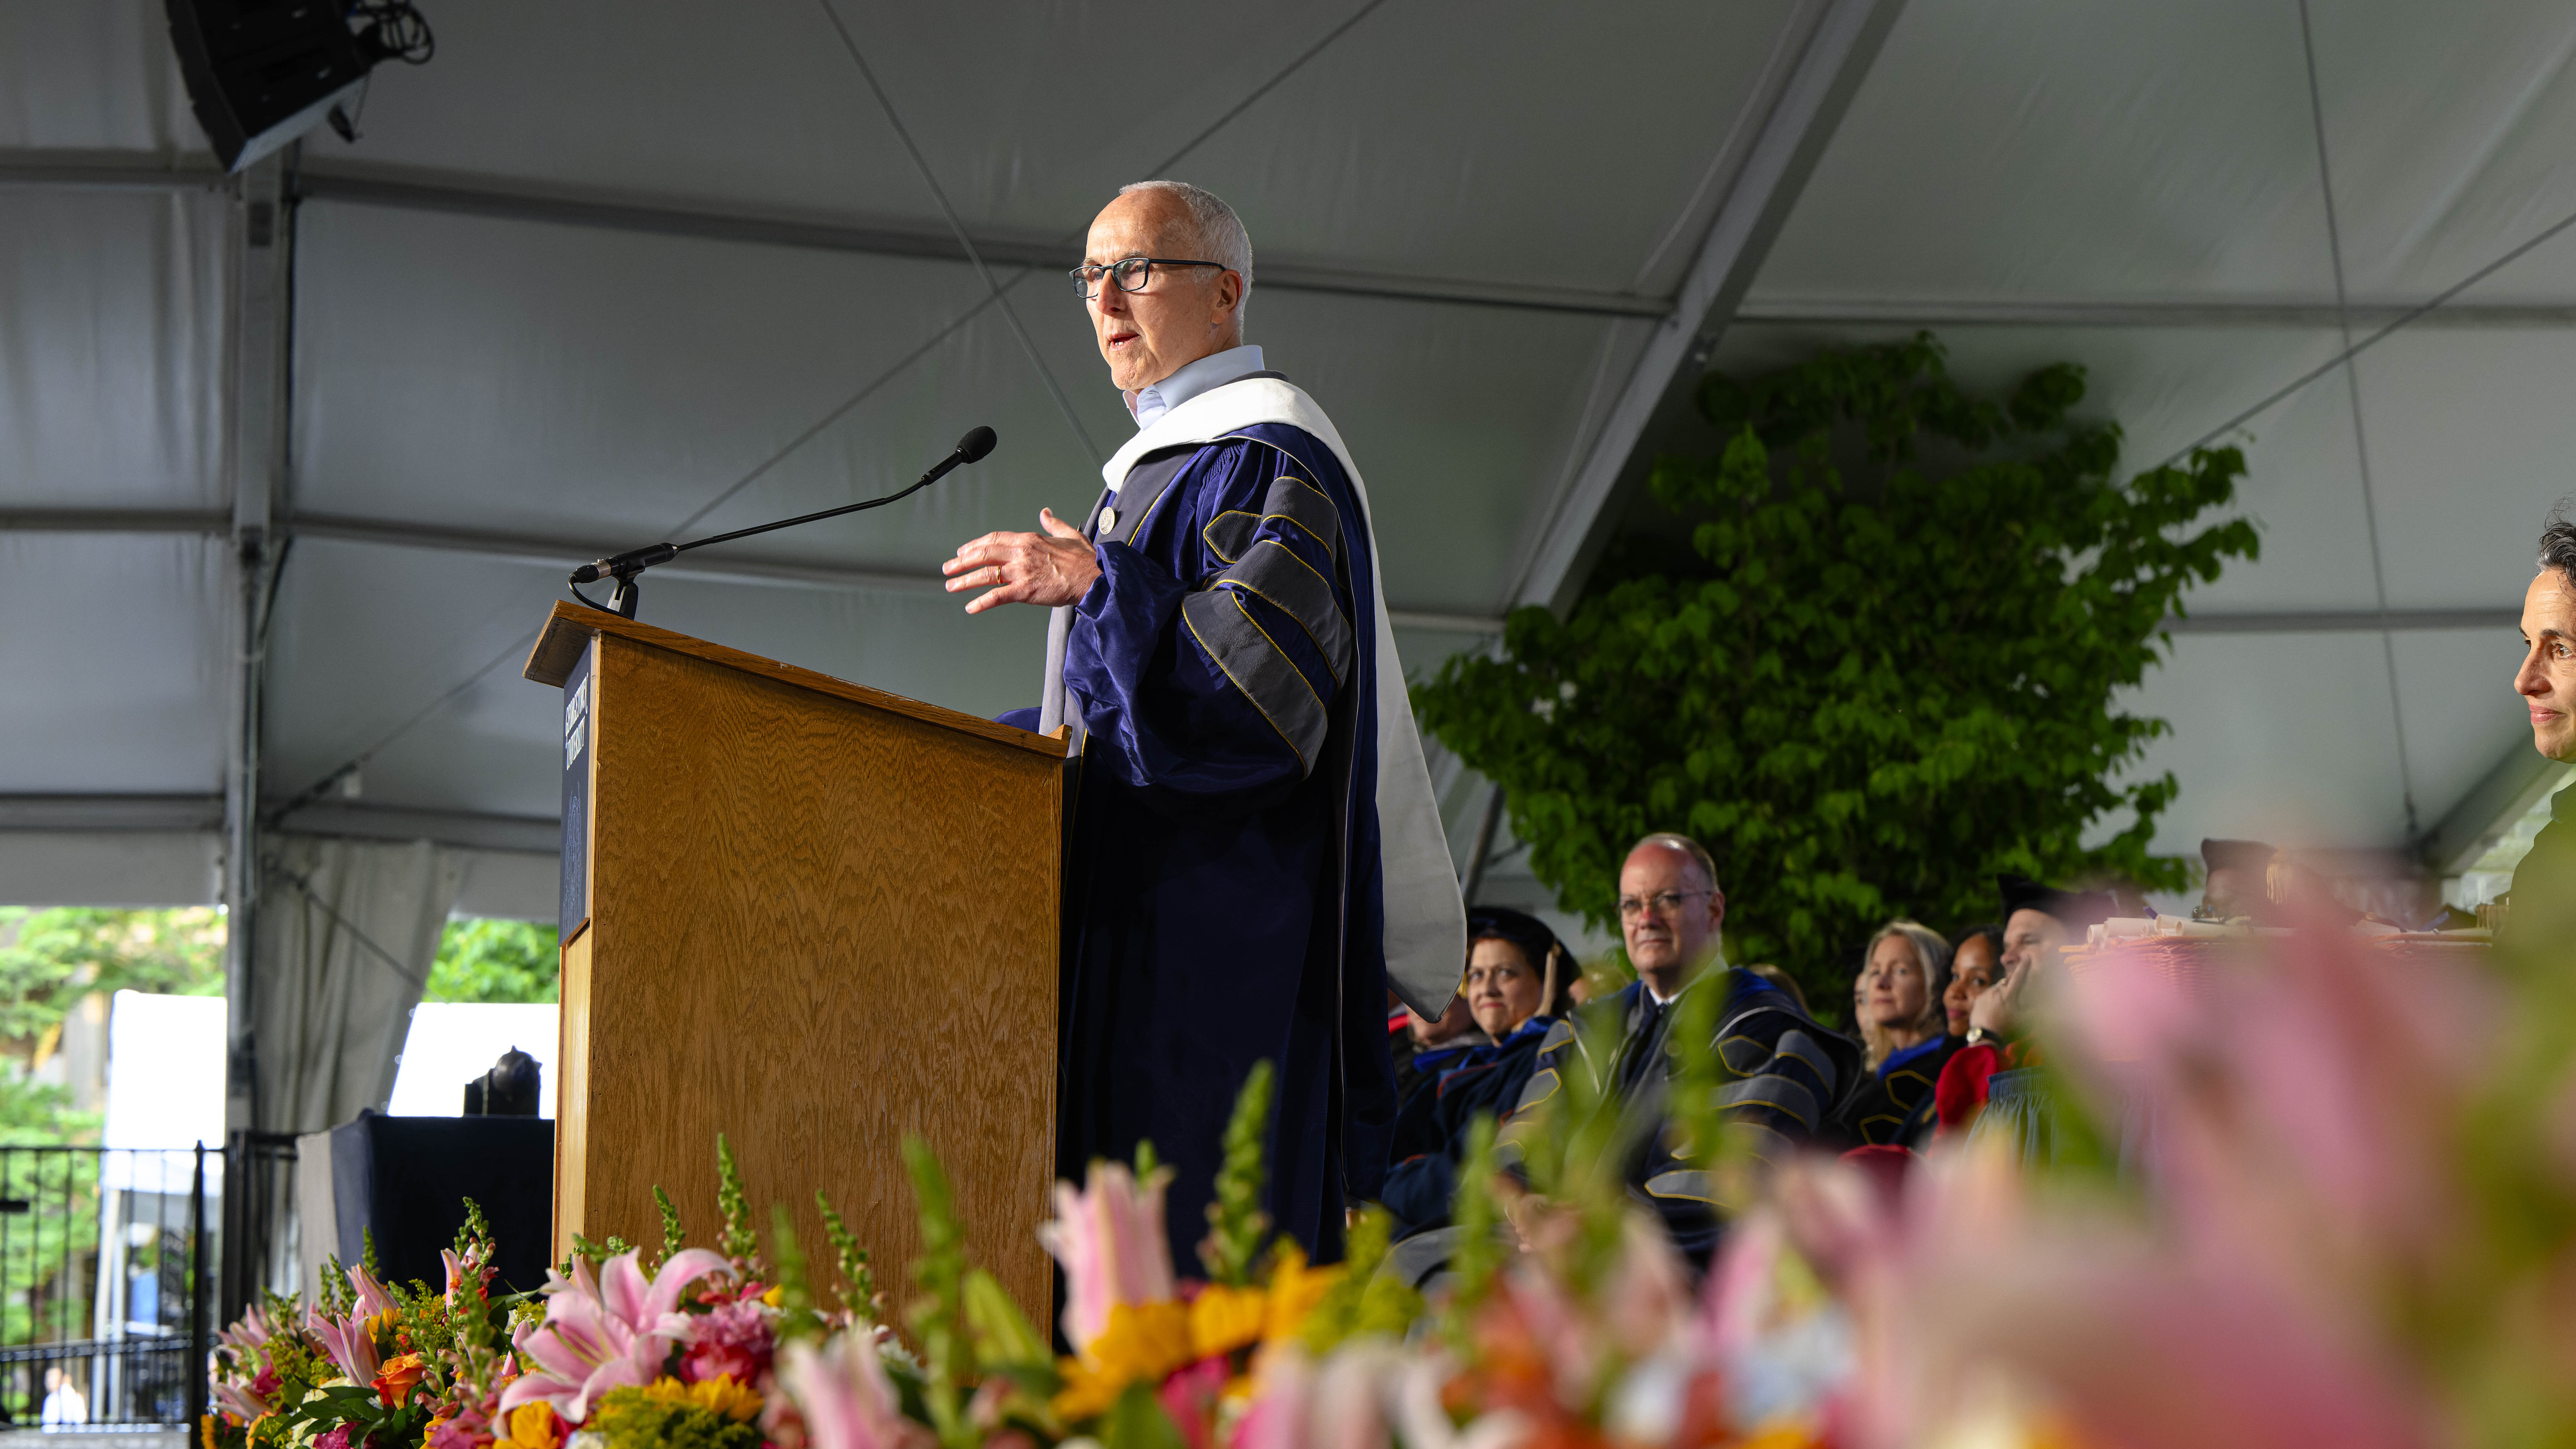 Frank McCourt delivering the 2023 commencement speech for the McCourt School of Public Policy at Georgetown University